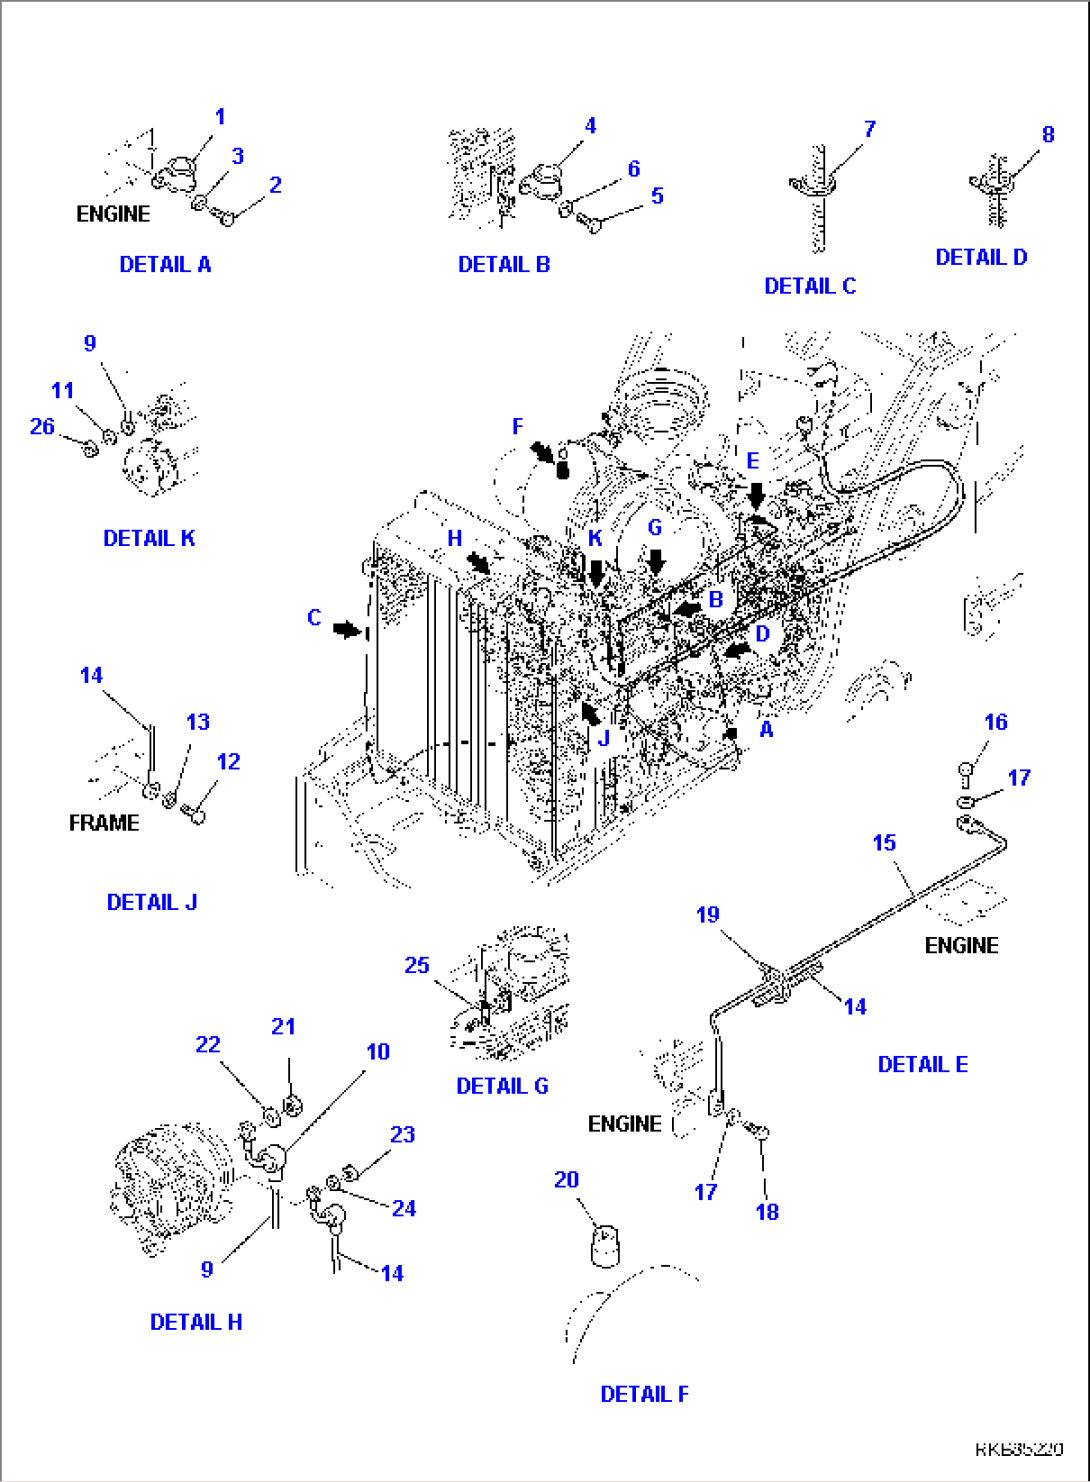 ELECTRICAL SYSTEM (ENGINE LINE) (1/2)